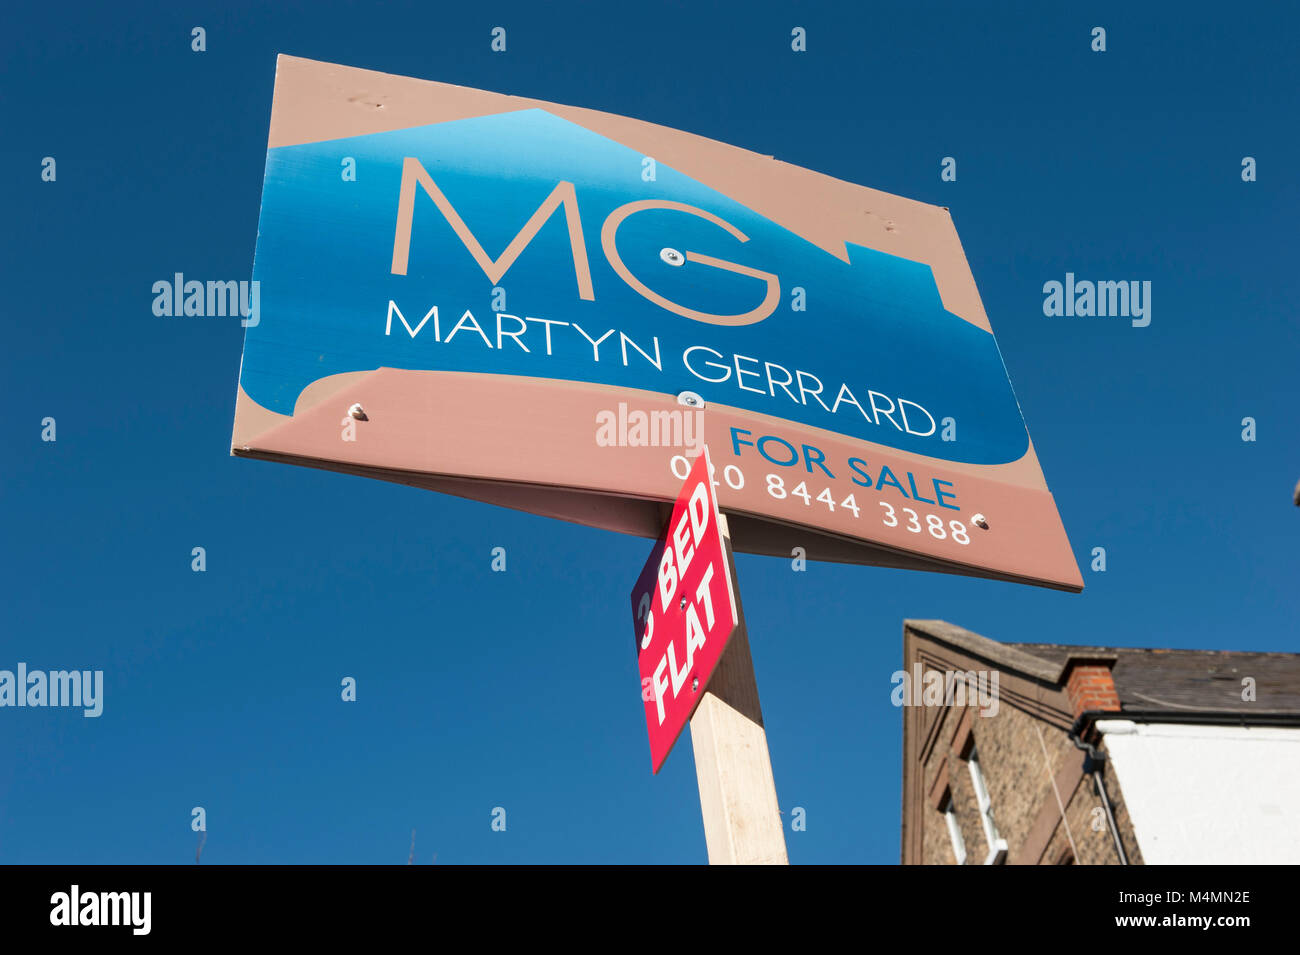 Martyn Gerrard estate agent for sale sign in Muswell Hill in London, England Stock Photo